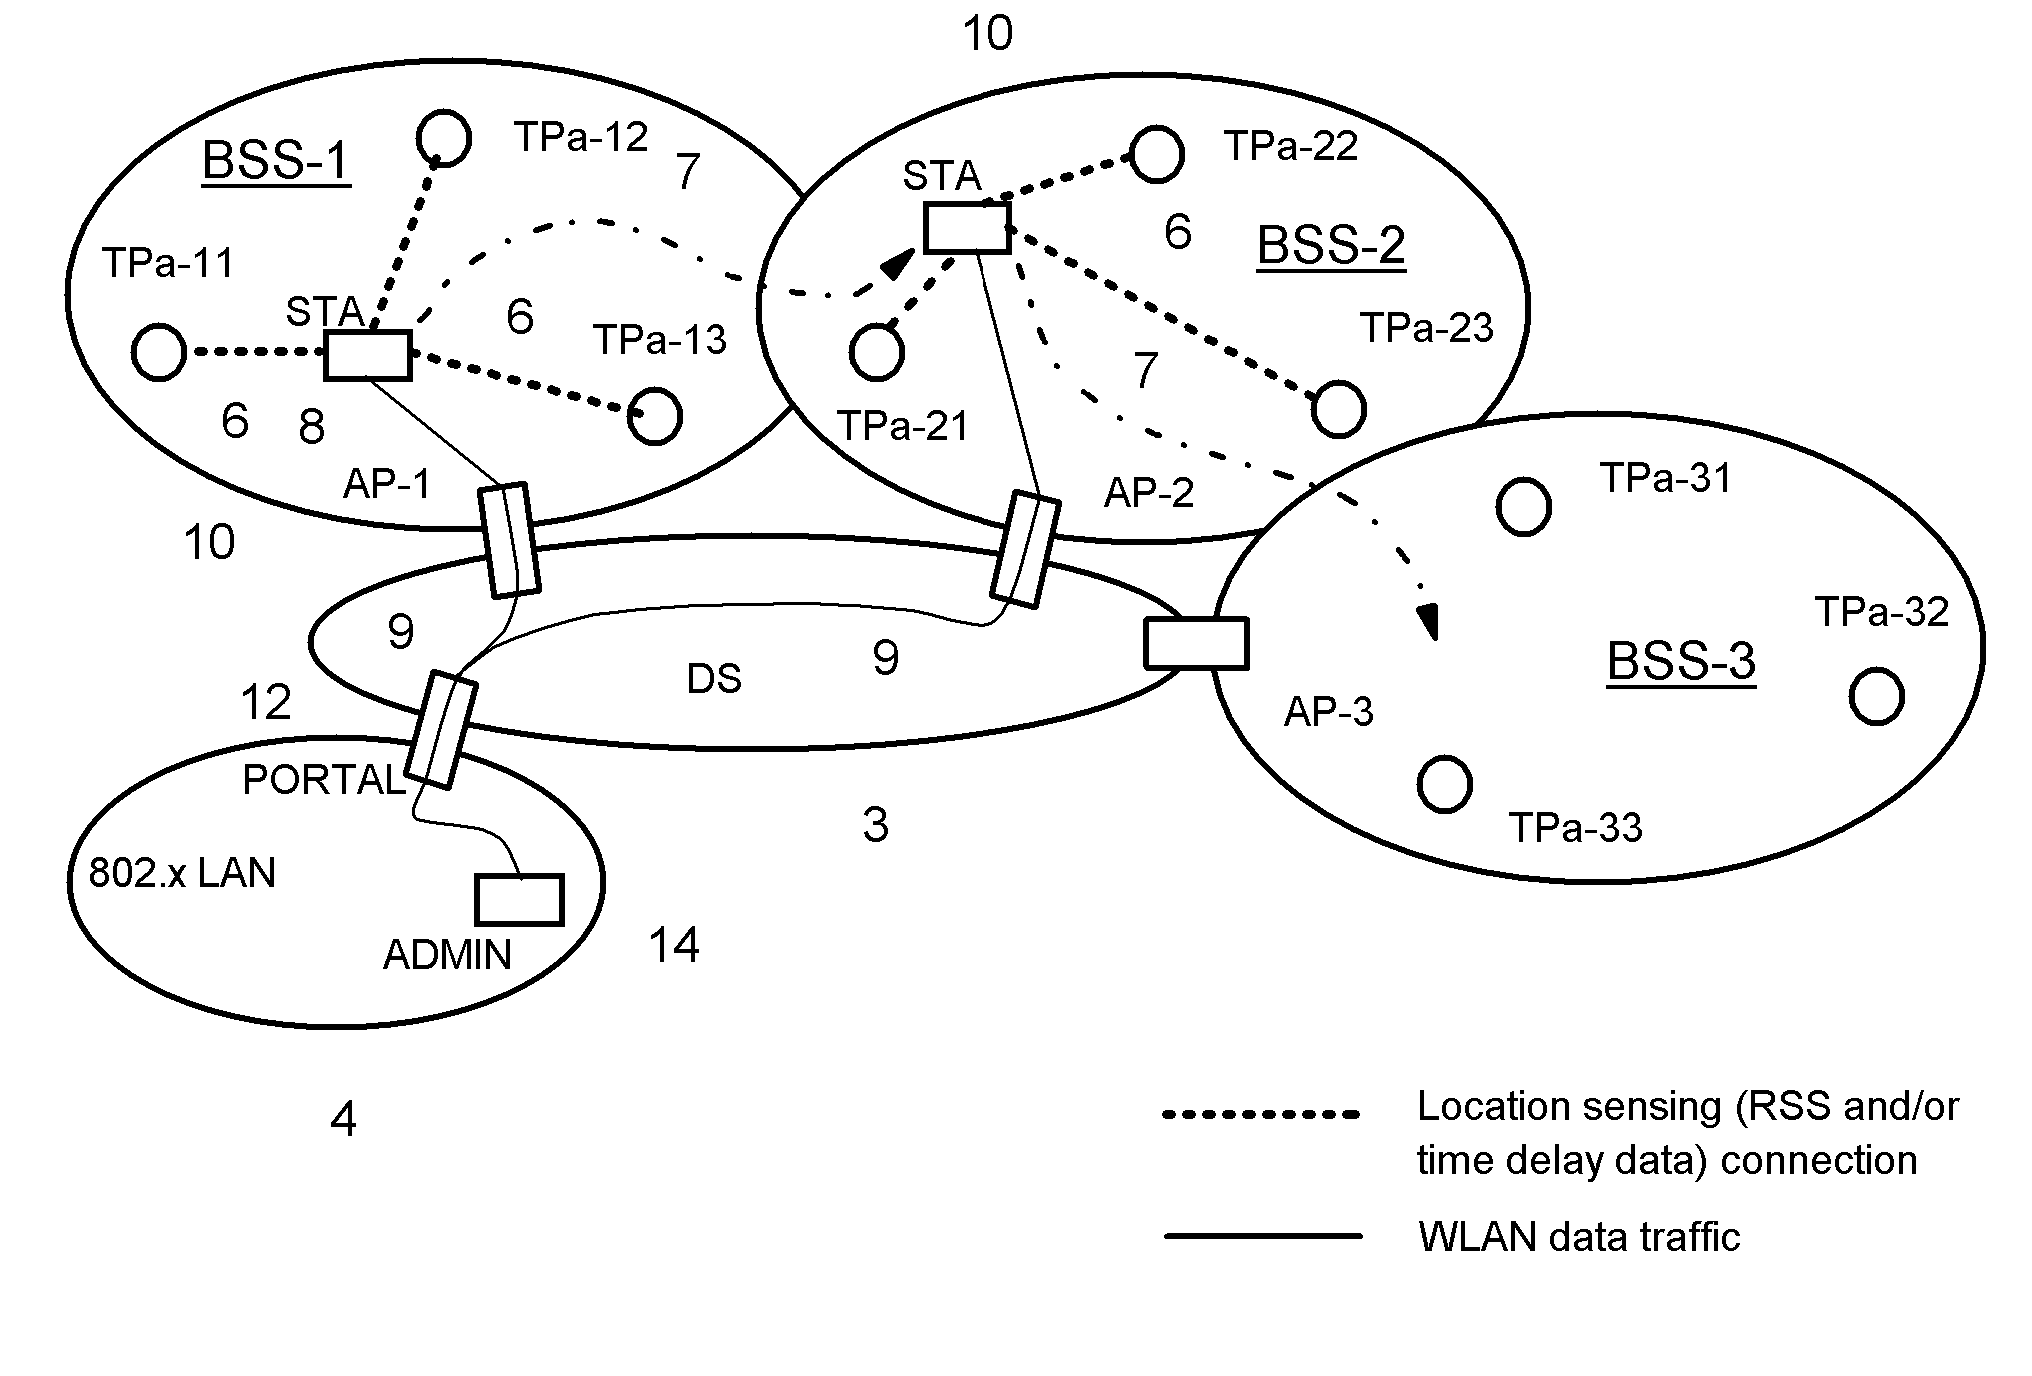 Transponder subsystem for supporting location awareness in wireless networks